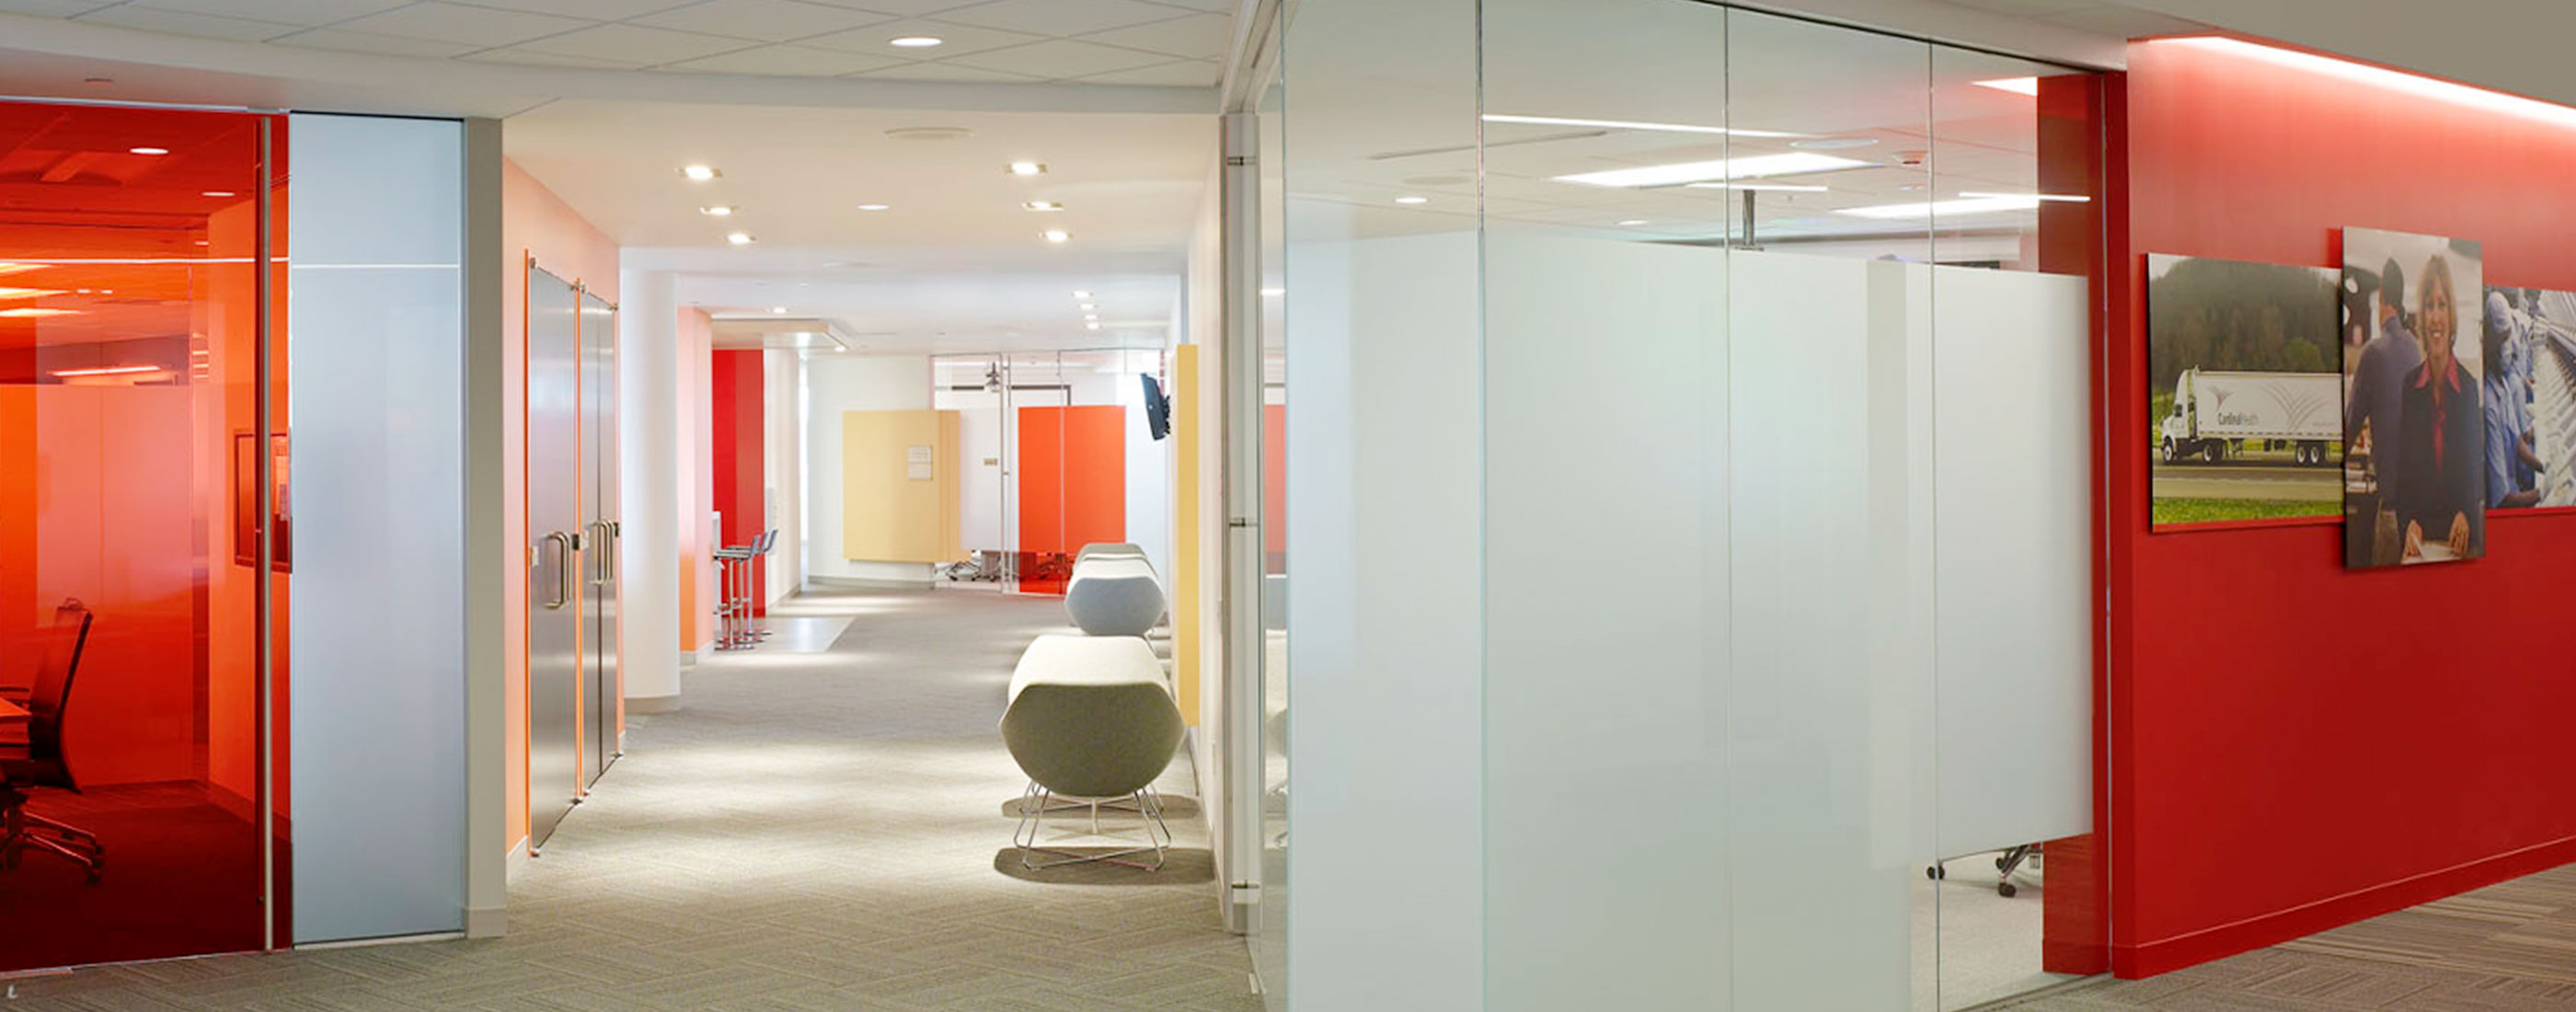 Informal meeting areas at the Cardinal Health Corporate Headquarters include bright lighting.